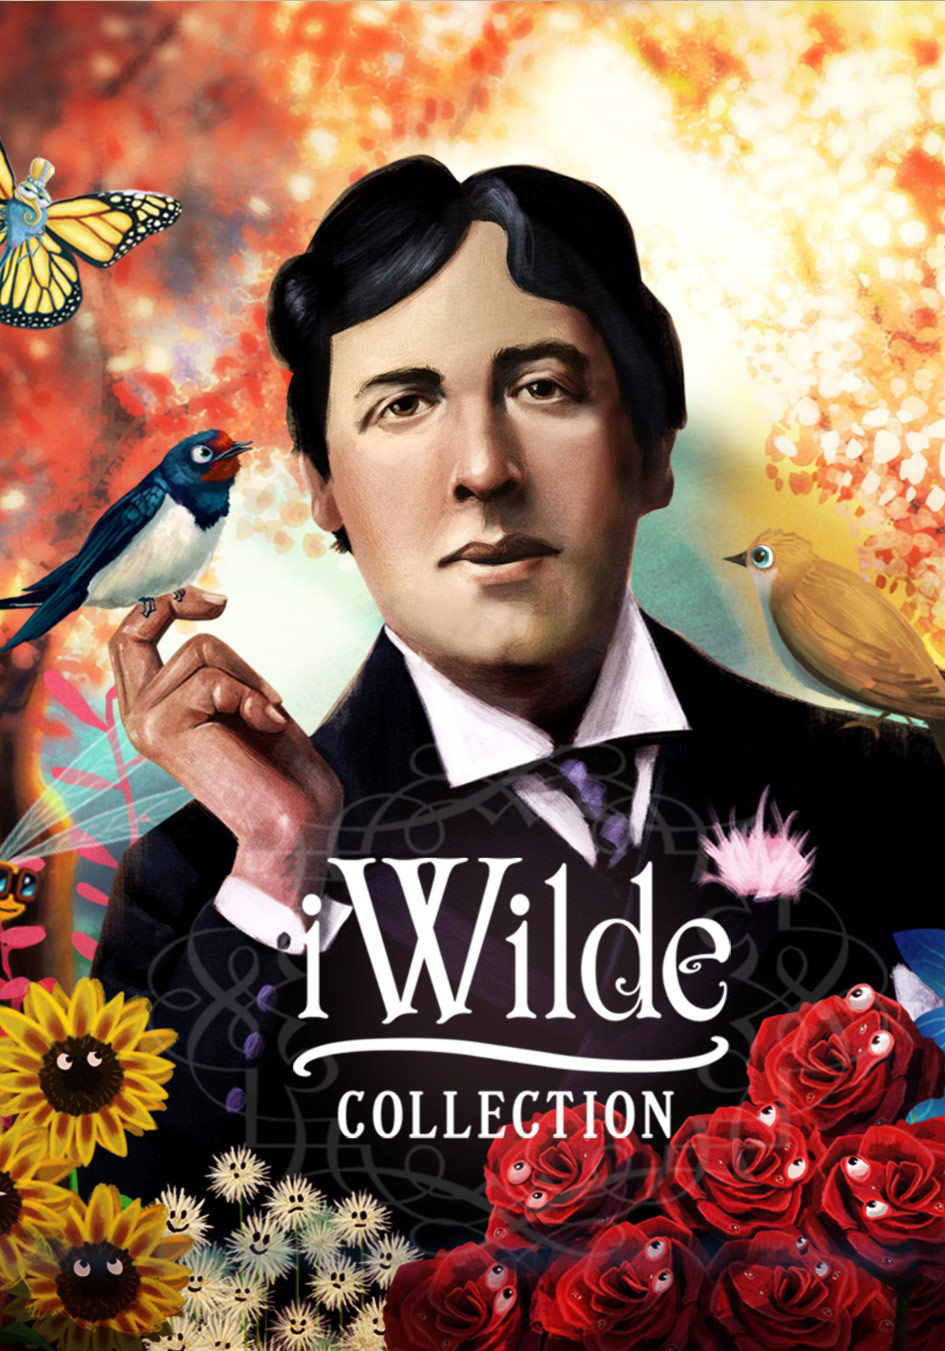 iWilde: The illustrated and interactive Oscar Wilde collection